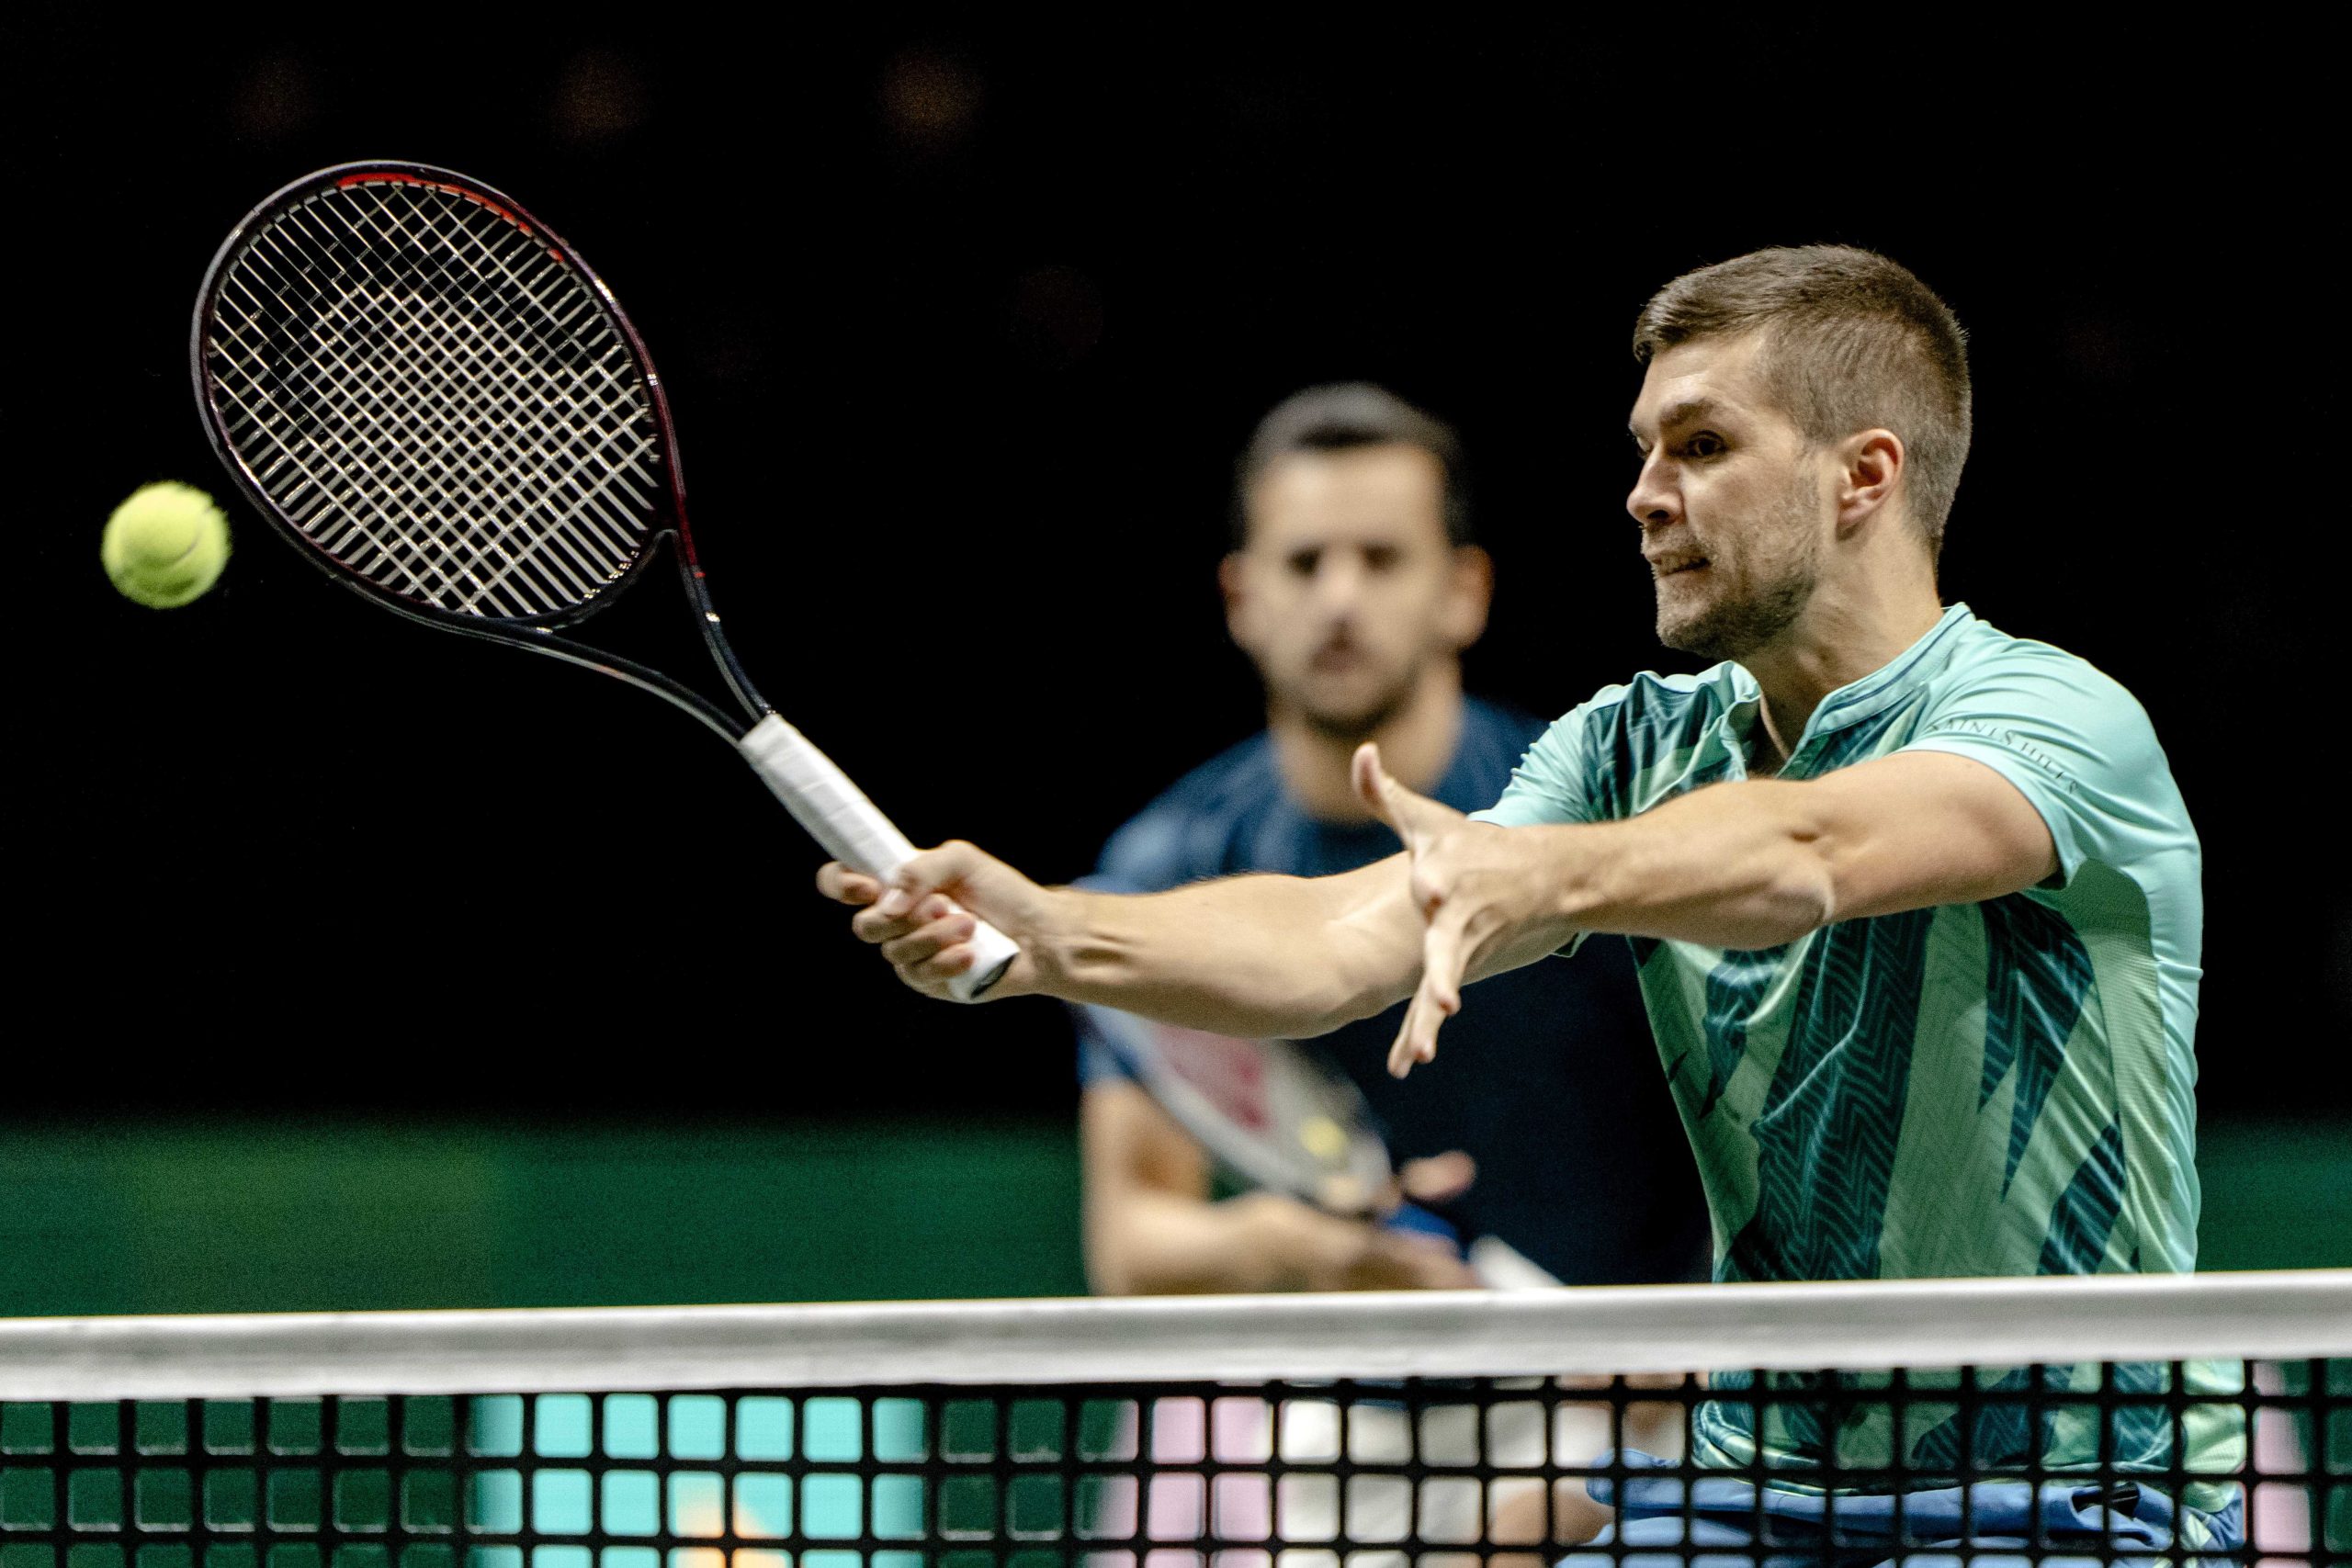 epa09739049 Nikola Mektic (R) and Mate Pavic, both from Croatia, in action against Robin Haase and Matwe Middelkoop, both from the Netherlands, during the 49th ABN AMRO World Tennis Tournament in Rotterdam, The Netherlands, 08 February 2022.  EPA/SANDER KONING